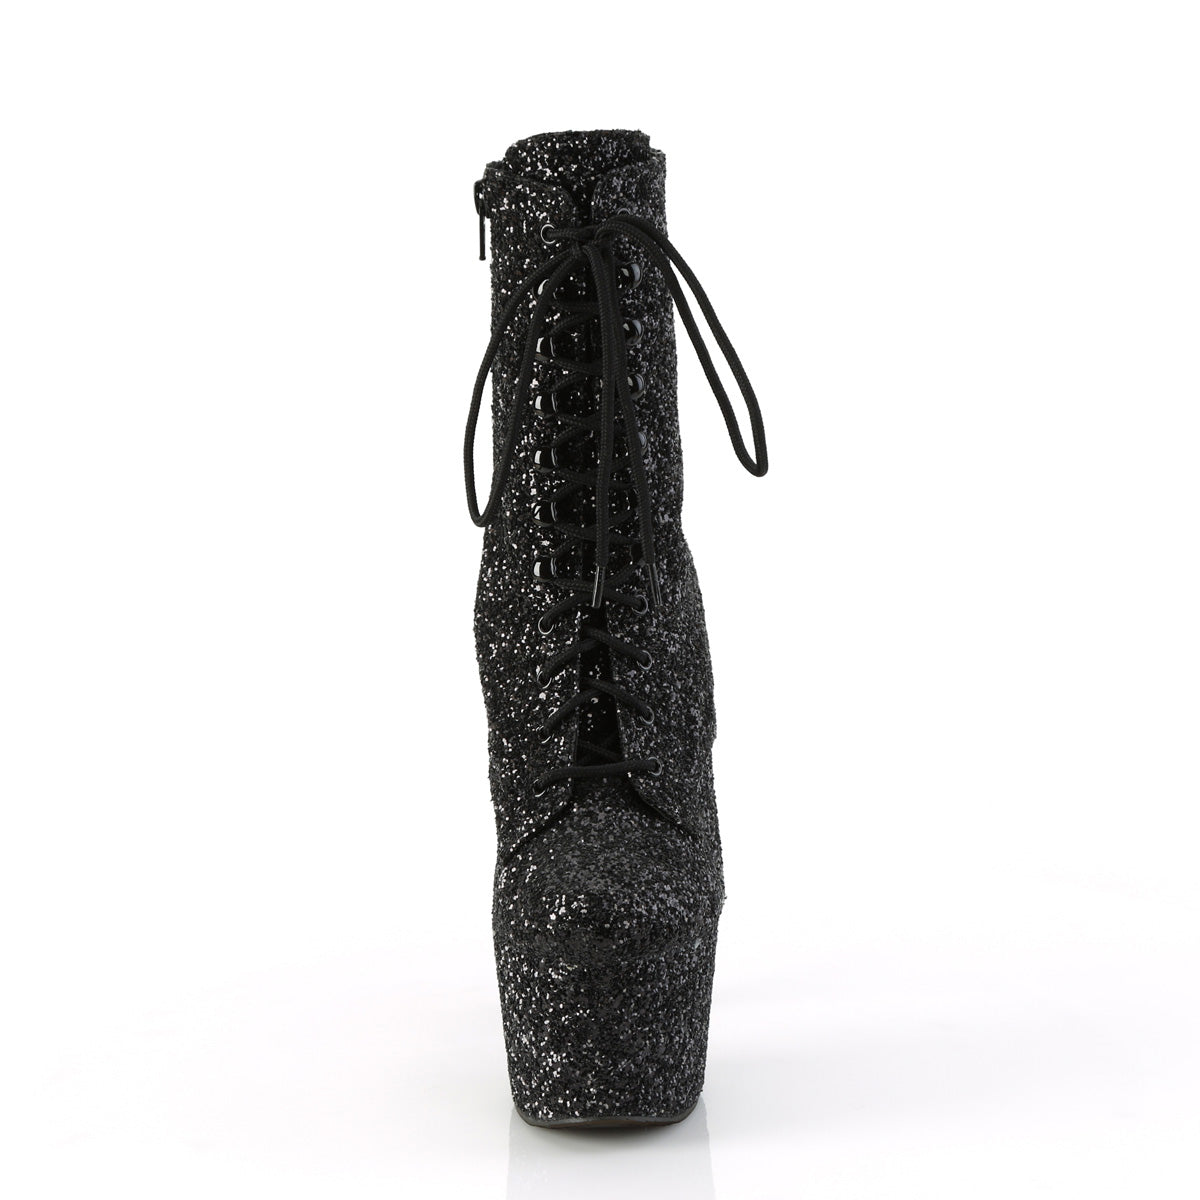 ADORE-1020GWR Pleaser Black Glitter Lace Up Kinky Boots